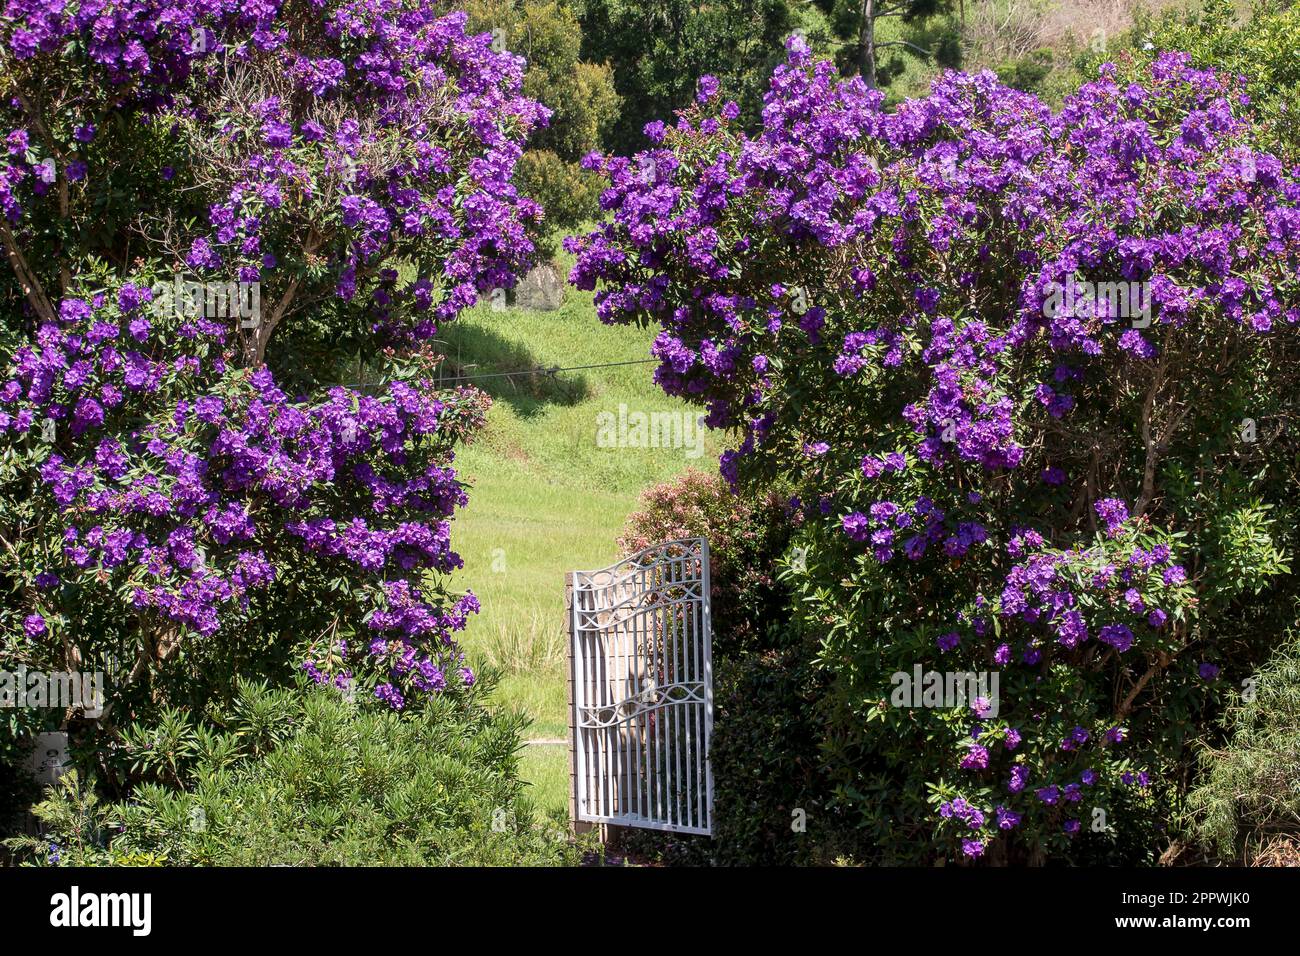 Gateway entrance to private Australian garden, flanked by purple tibouchina blossom, Tibouchina granulosa. Autumn in Queensland. Stock Photo